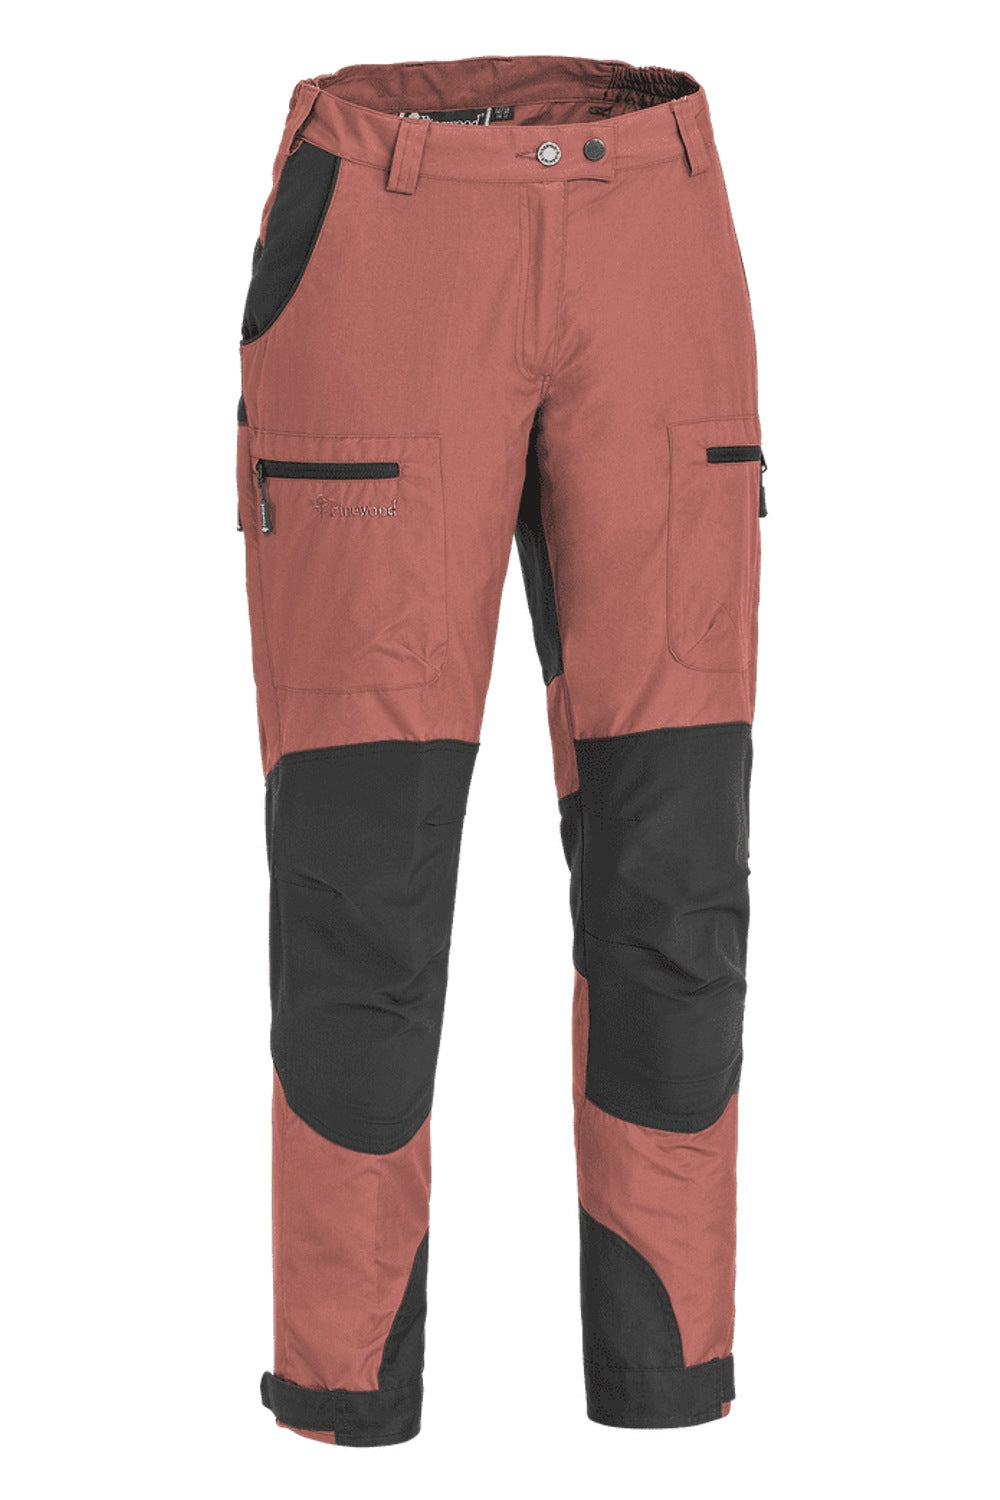 Pinewood Womens Caribou TC Trousers in Rusty Pink/Dark Anthracite 